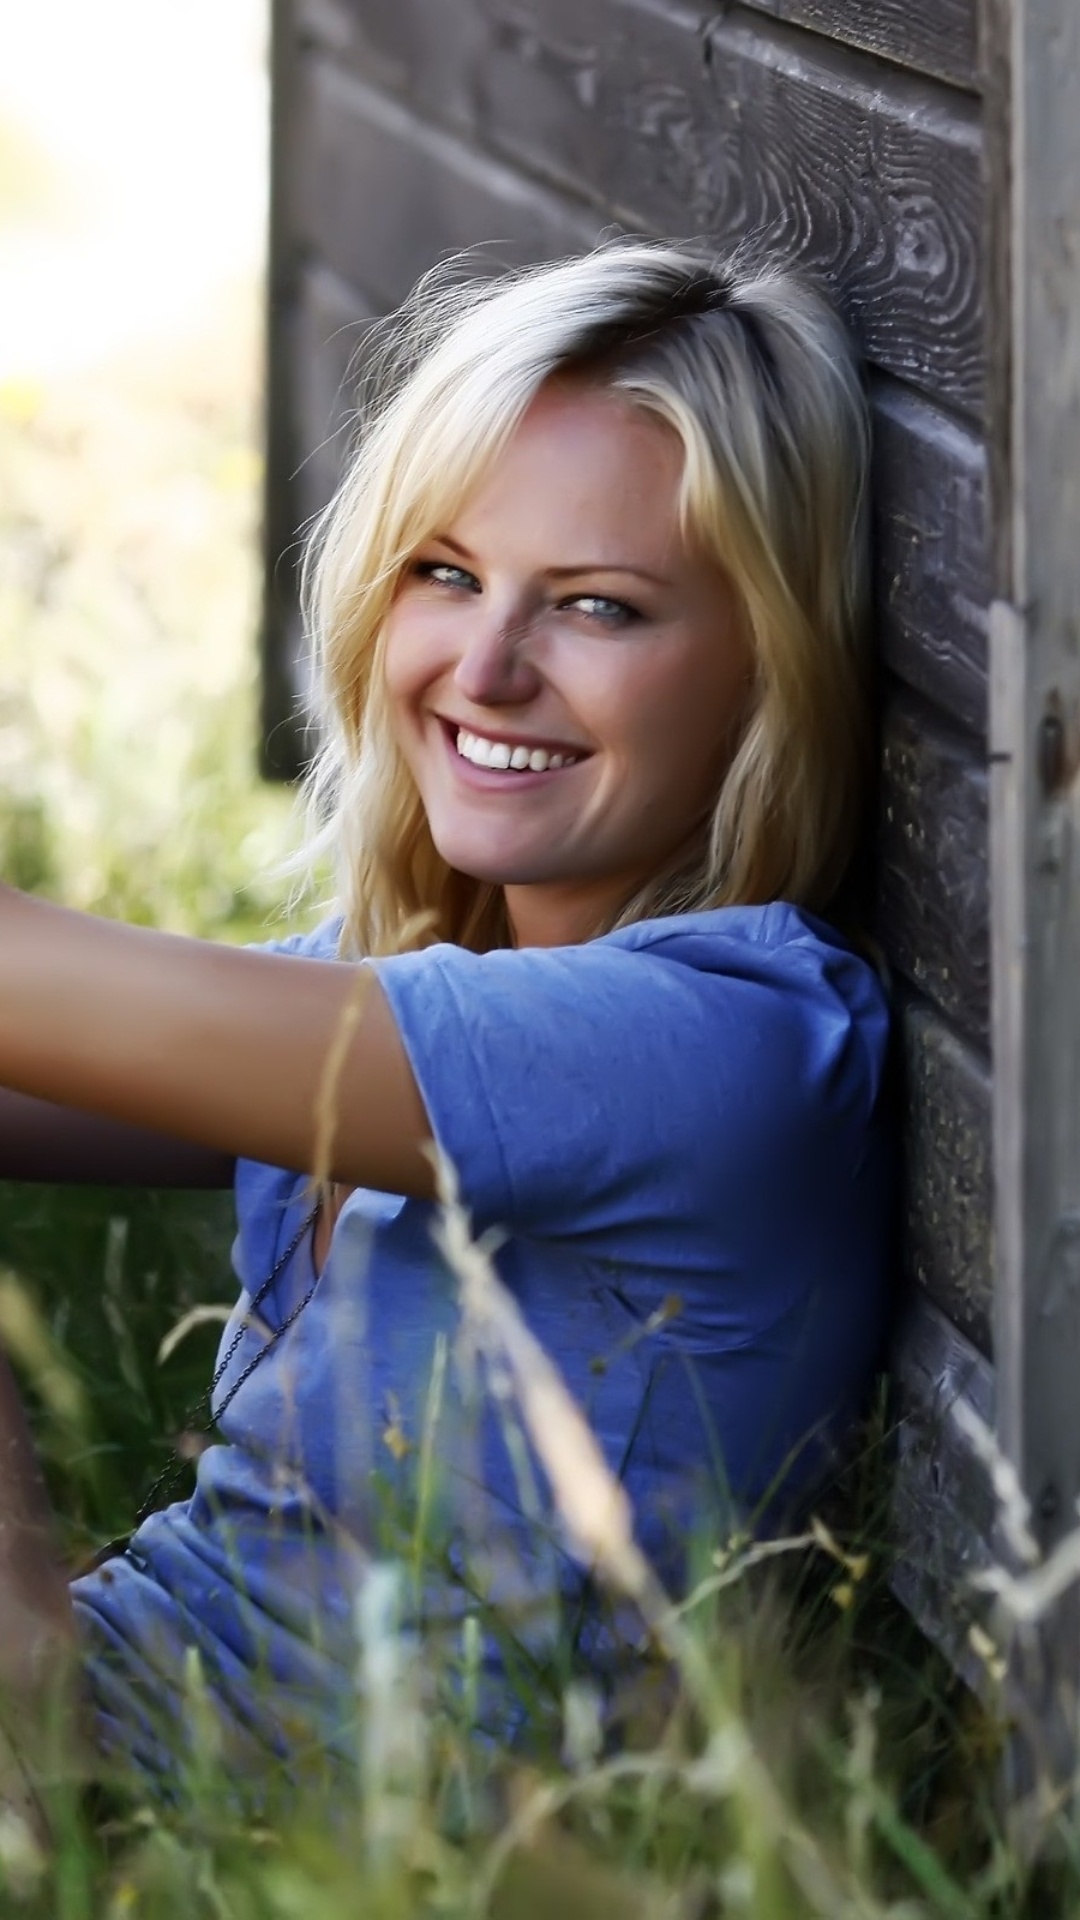 Malin Akerman: Played the lead role of Ally in the CBS comedy pilot The Three of Us. 1080x1920 Full HD Wallpaper.